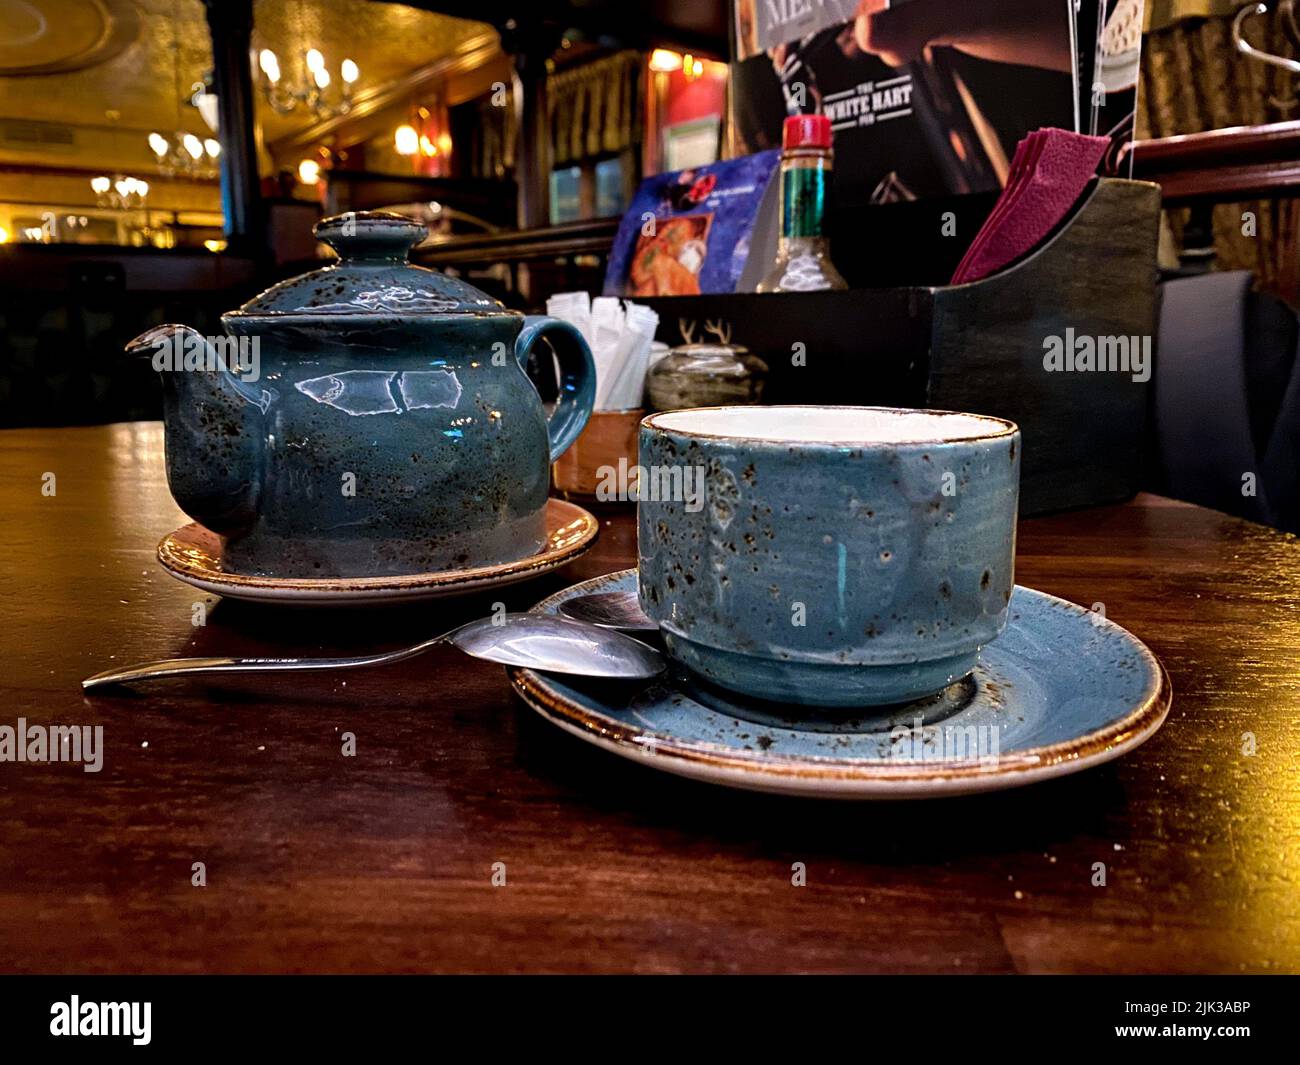 https://c8.alamy.com/comp/2JK3ABP/hunting-pub-decorated-in-the-old-english-style-antique-furniture-made-of-red-oak-and-beech-an-old-blue-cup-and-teapot-in-a-gap-on-the-table-2JK3ABP.jpg